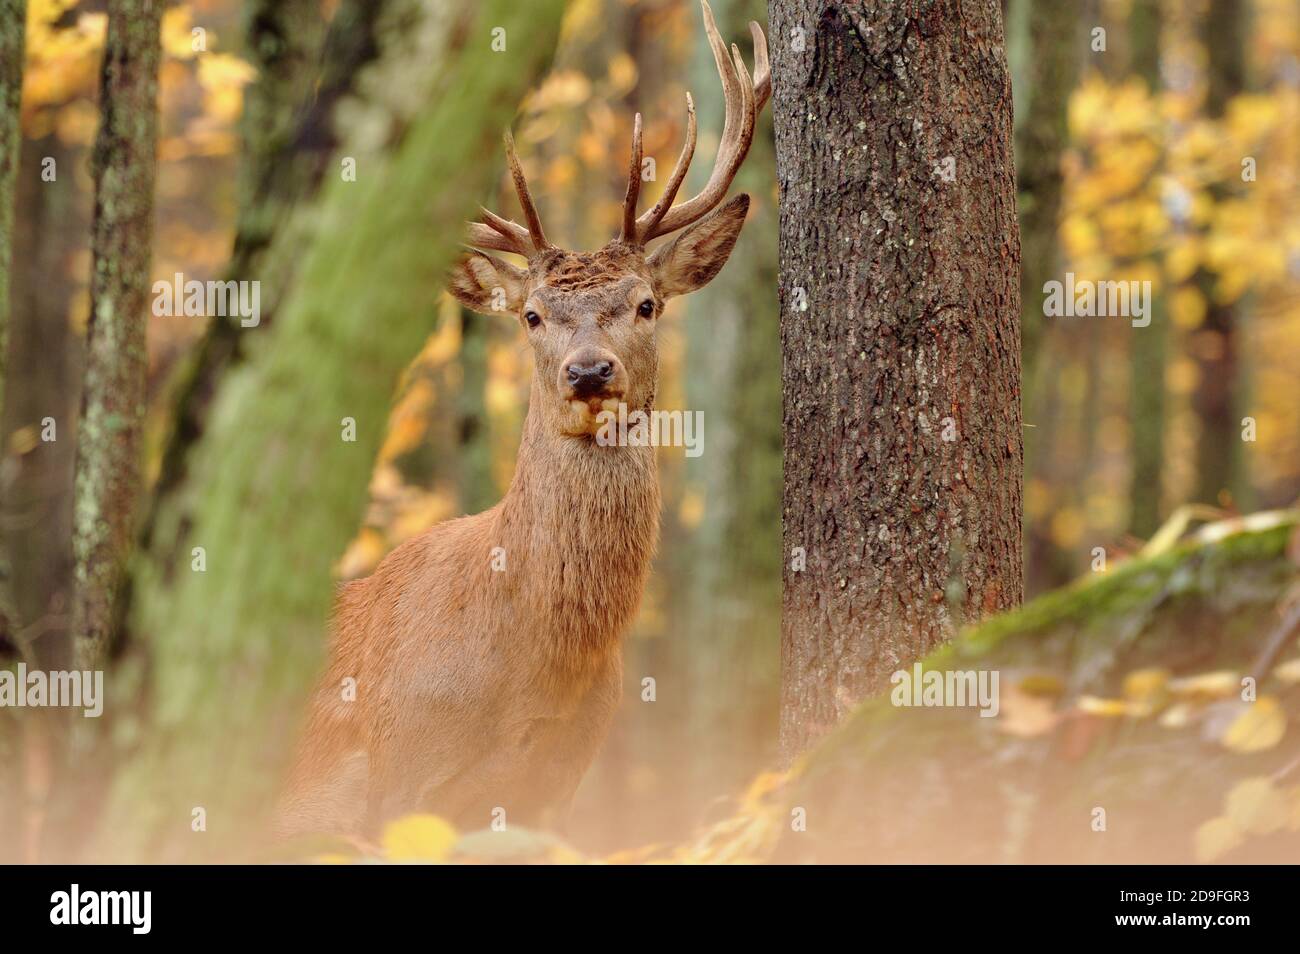 A Red Deer (Cervus elaphus) hiding in the forest on an autumn day. Stock Photo